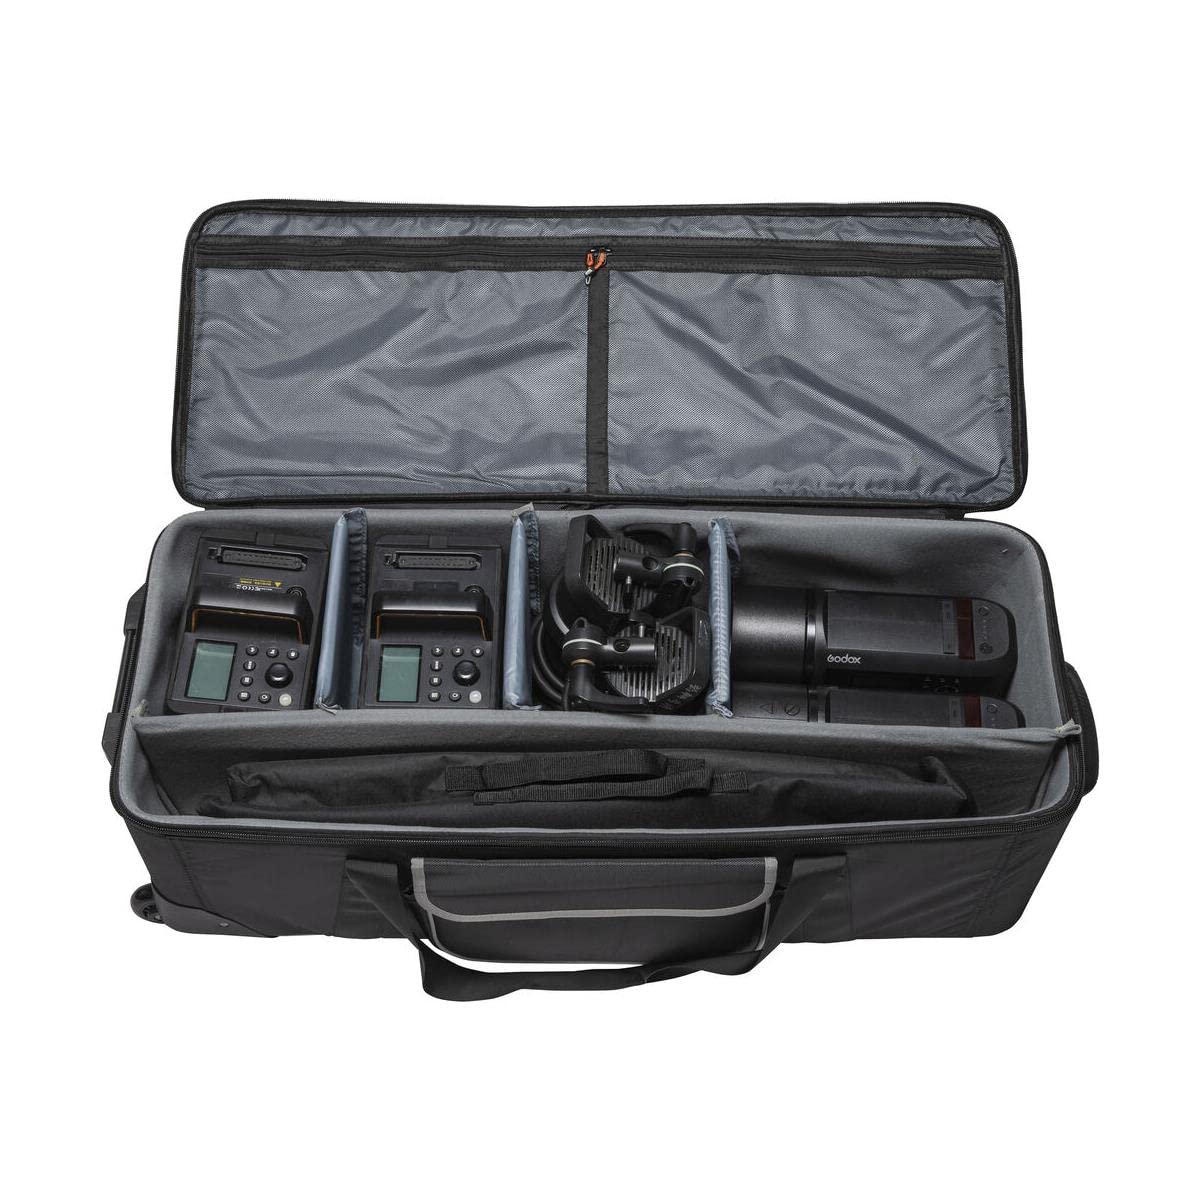 GODOX CB-06 Hard Carrying Case with Wheels